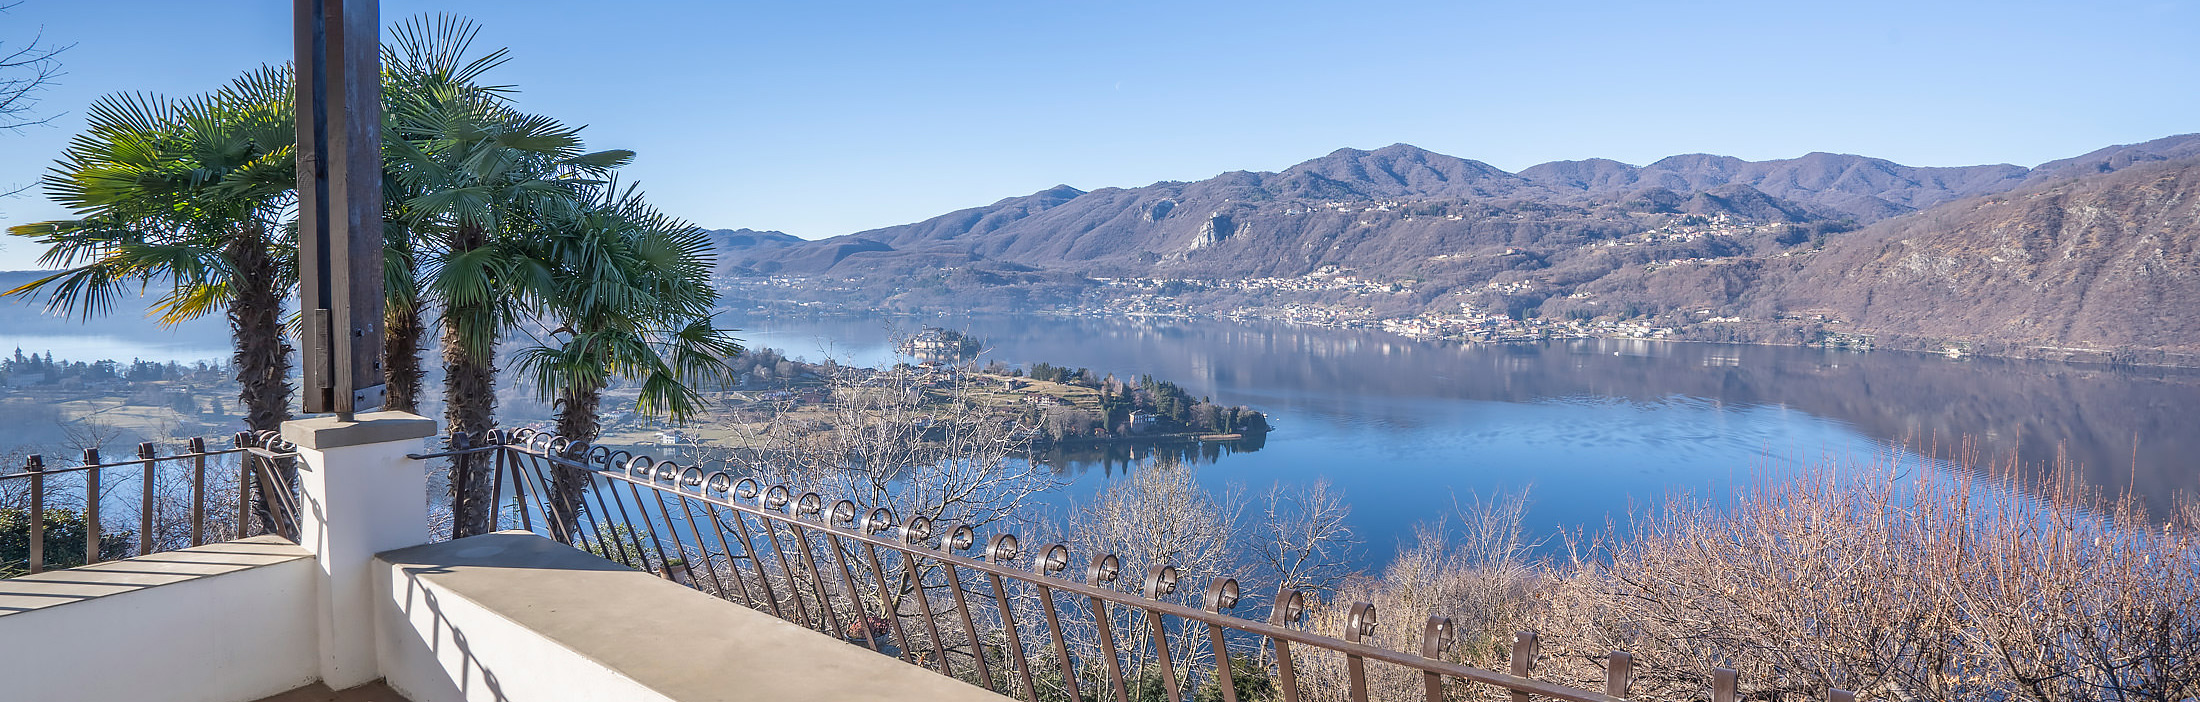 MIASINO Detached villa with garden and breathtaking view over Lake Orta